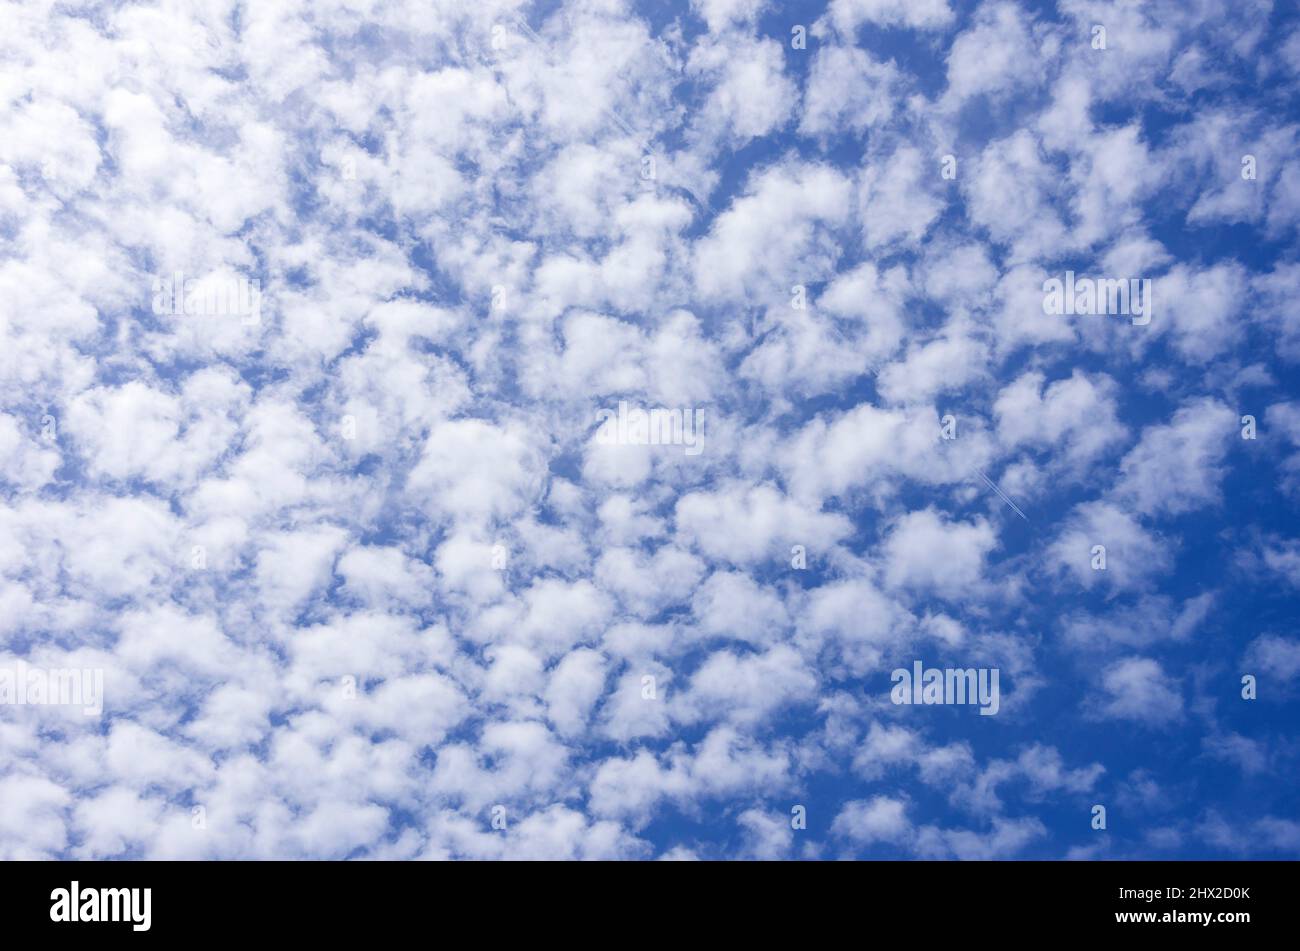 Background of a mackerel sky cloud formation. Stock Photo